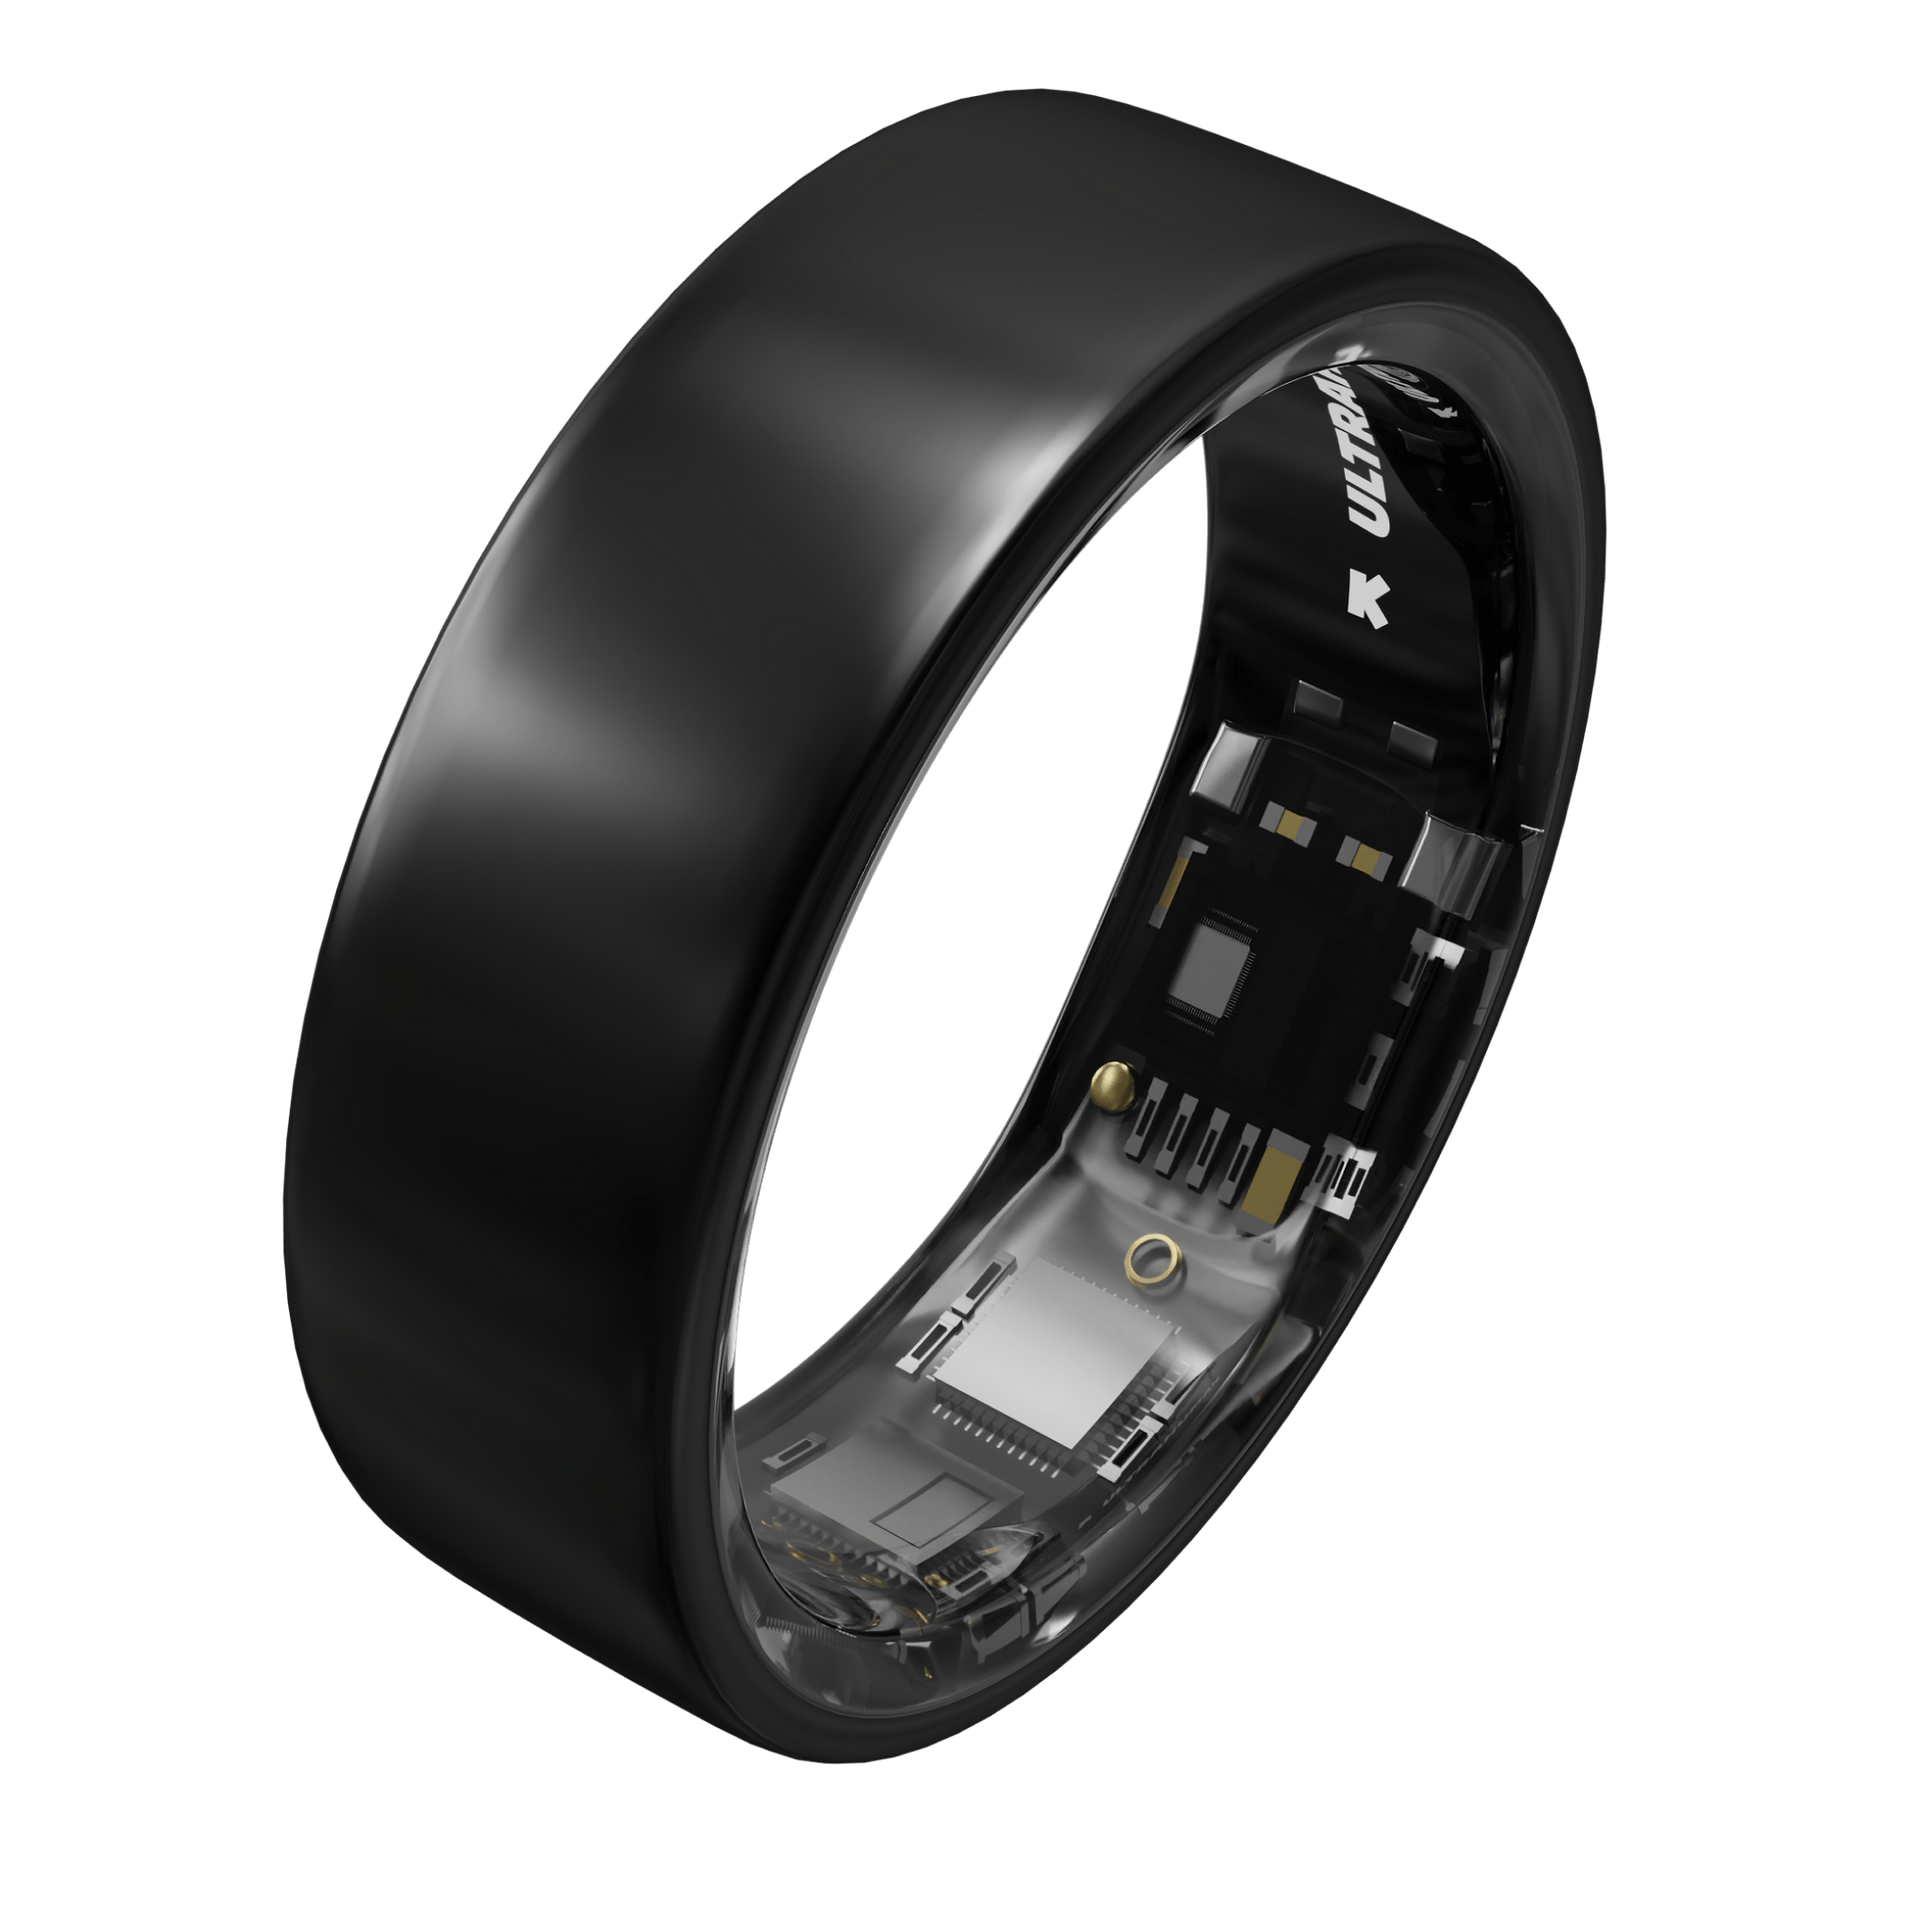 Ultrahuman Ring AIR With Skin Temperature Sensor, Phase Response Curve  Launched In India - Gizmochina